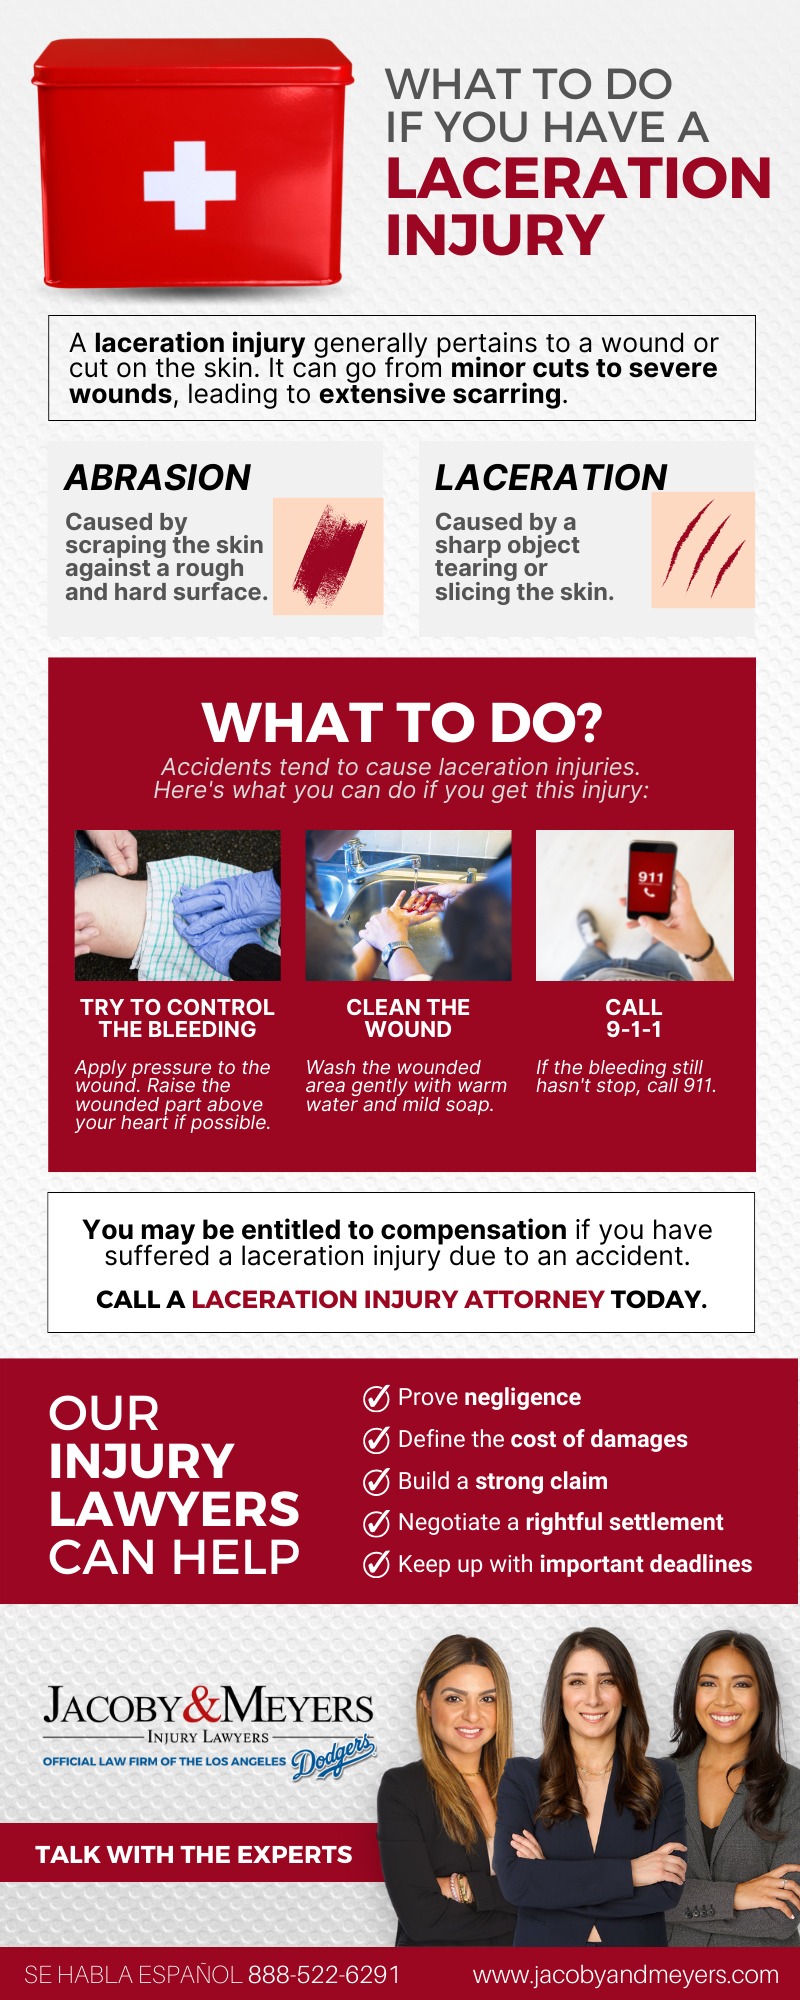 What To Do if You Have a Laceration Injury Infographic